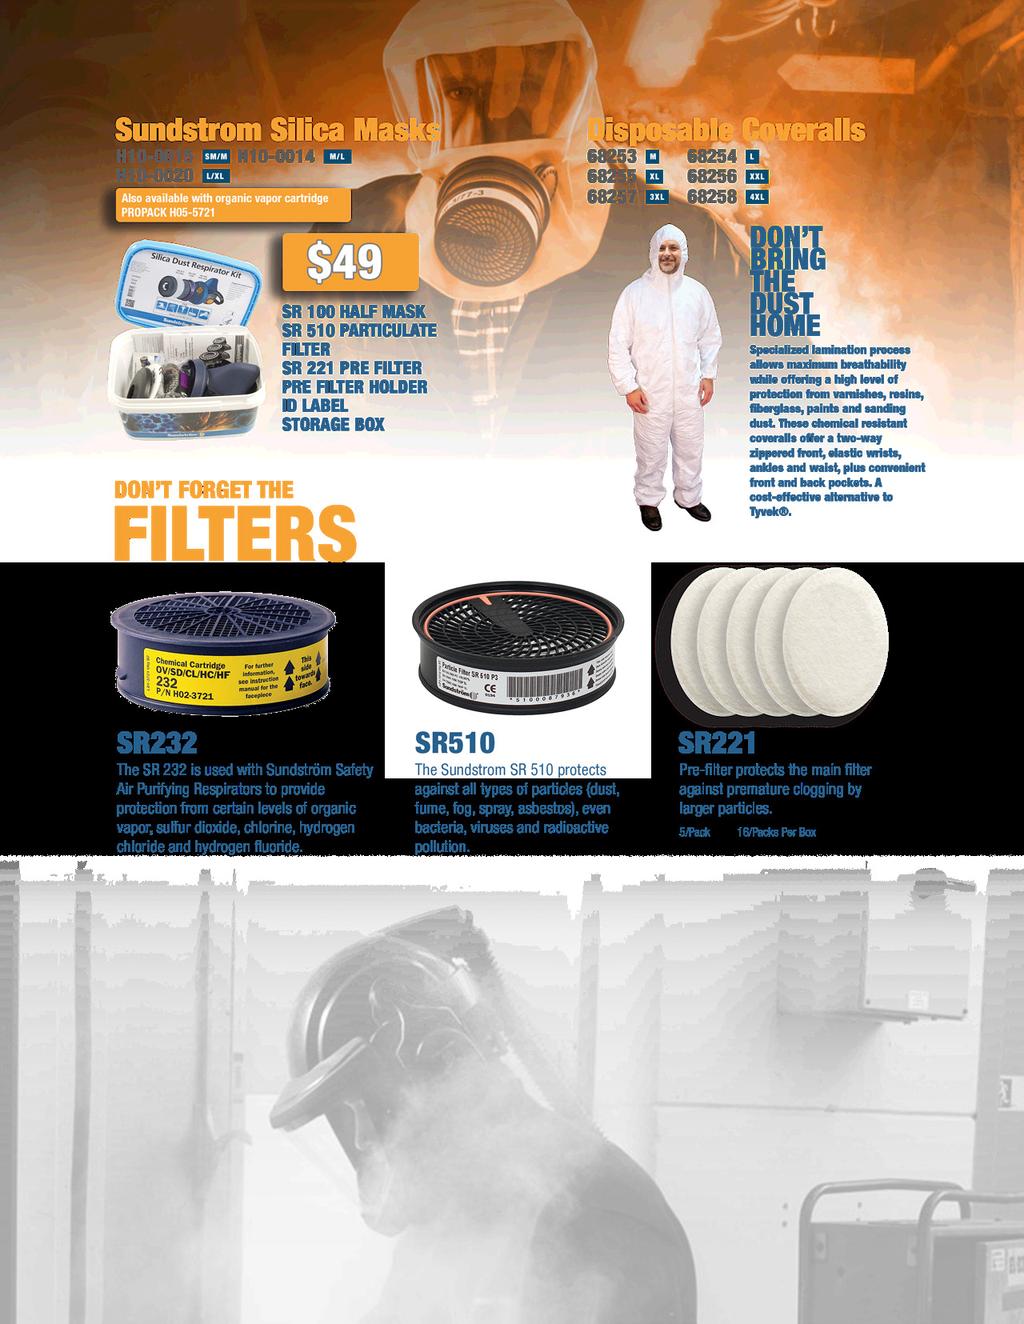 MUST BE REPLACED DAILY FAR LESS COST OVER TIME KIT Sundstrom Pre-filters extend P100 filter life up to 5 TIMES longer and are 40% less expensive over time than N95